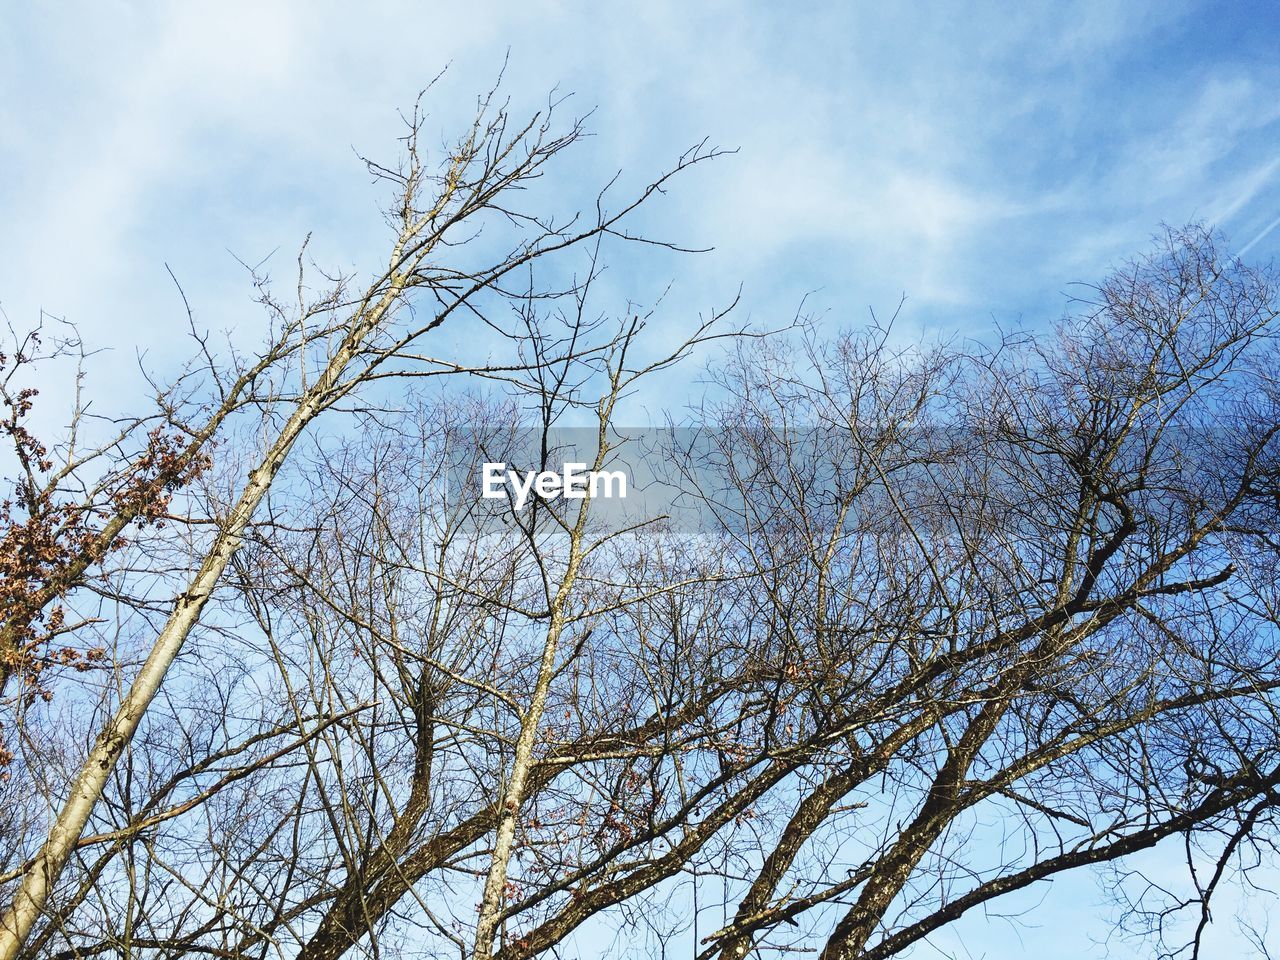 LOW ANGLE VIEW OF BARE TREES AGAINST CLOUDY SKY